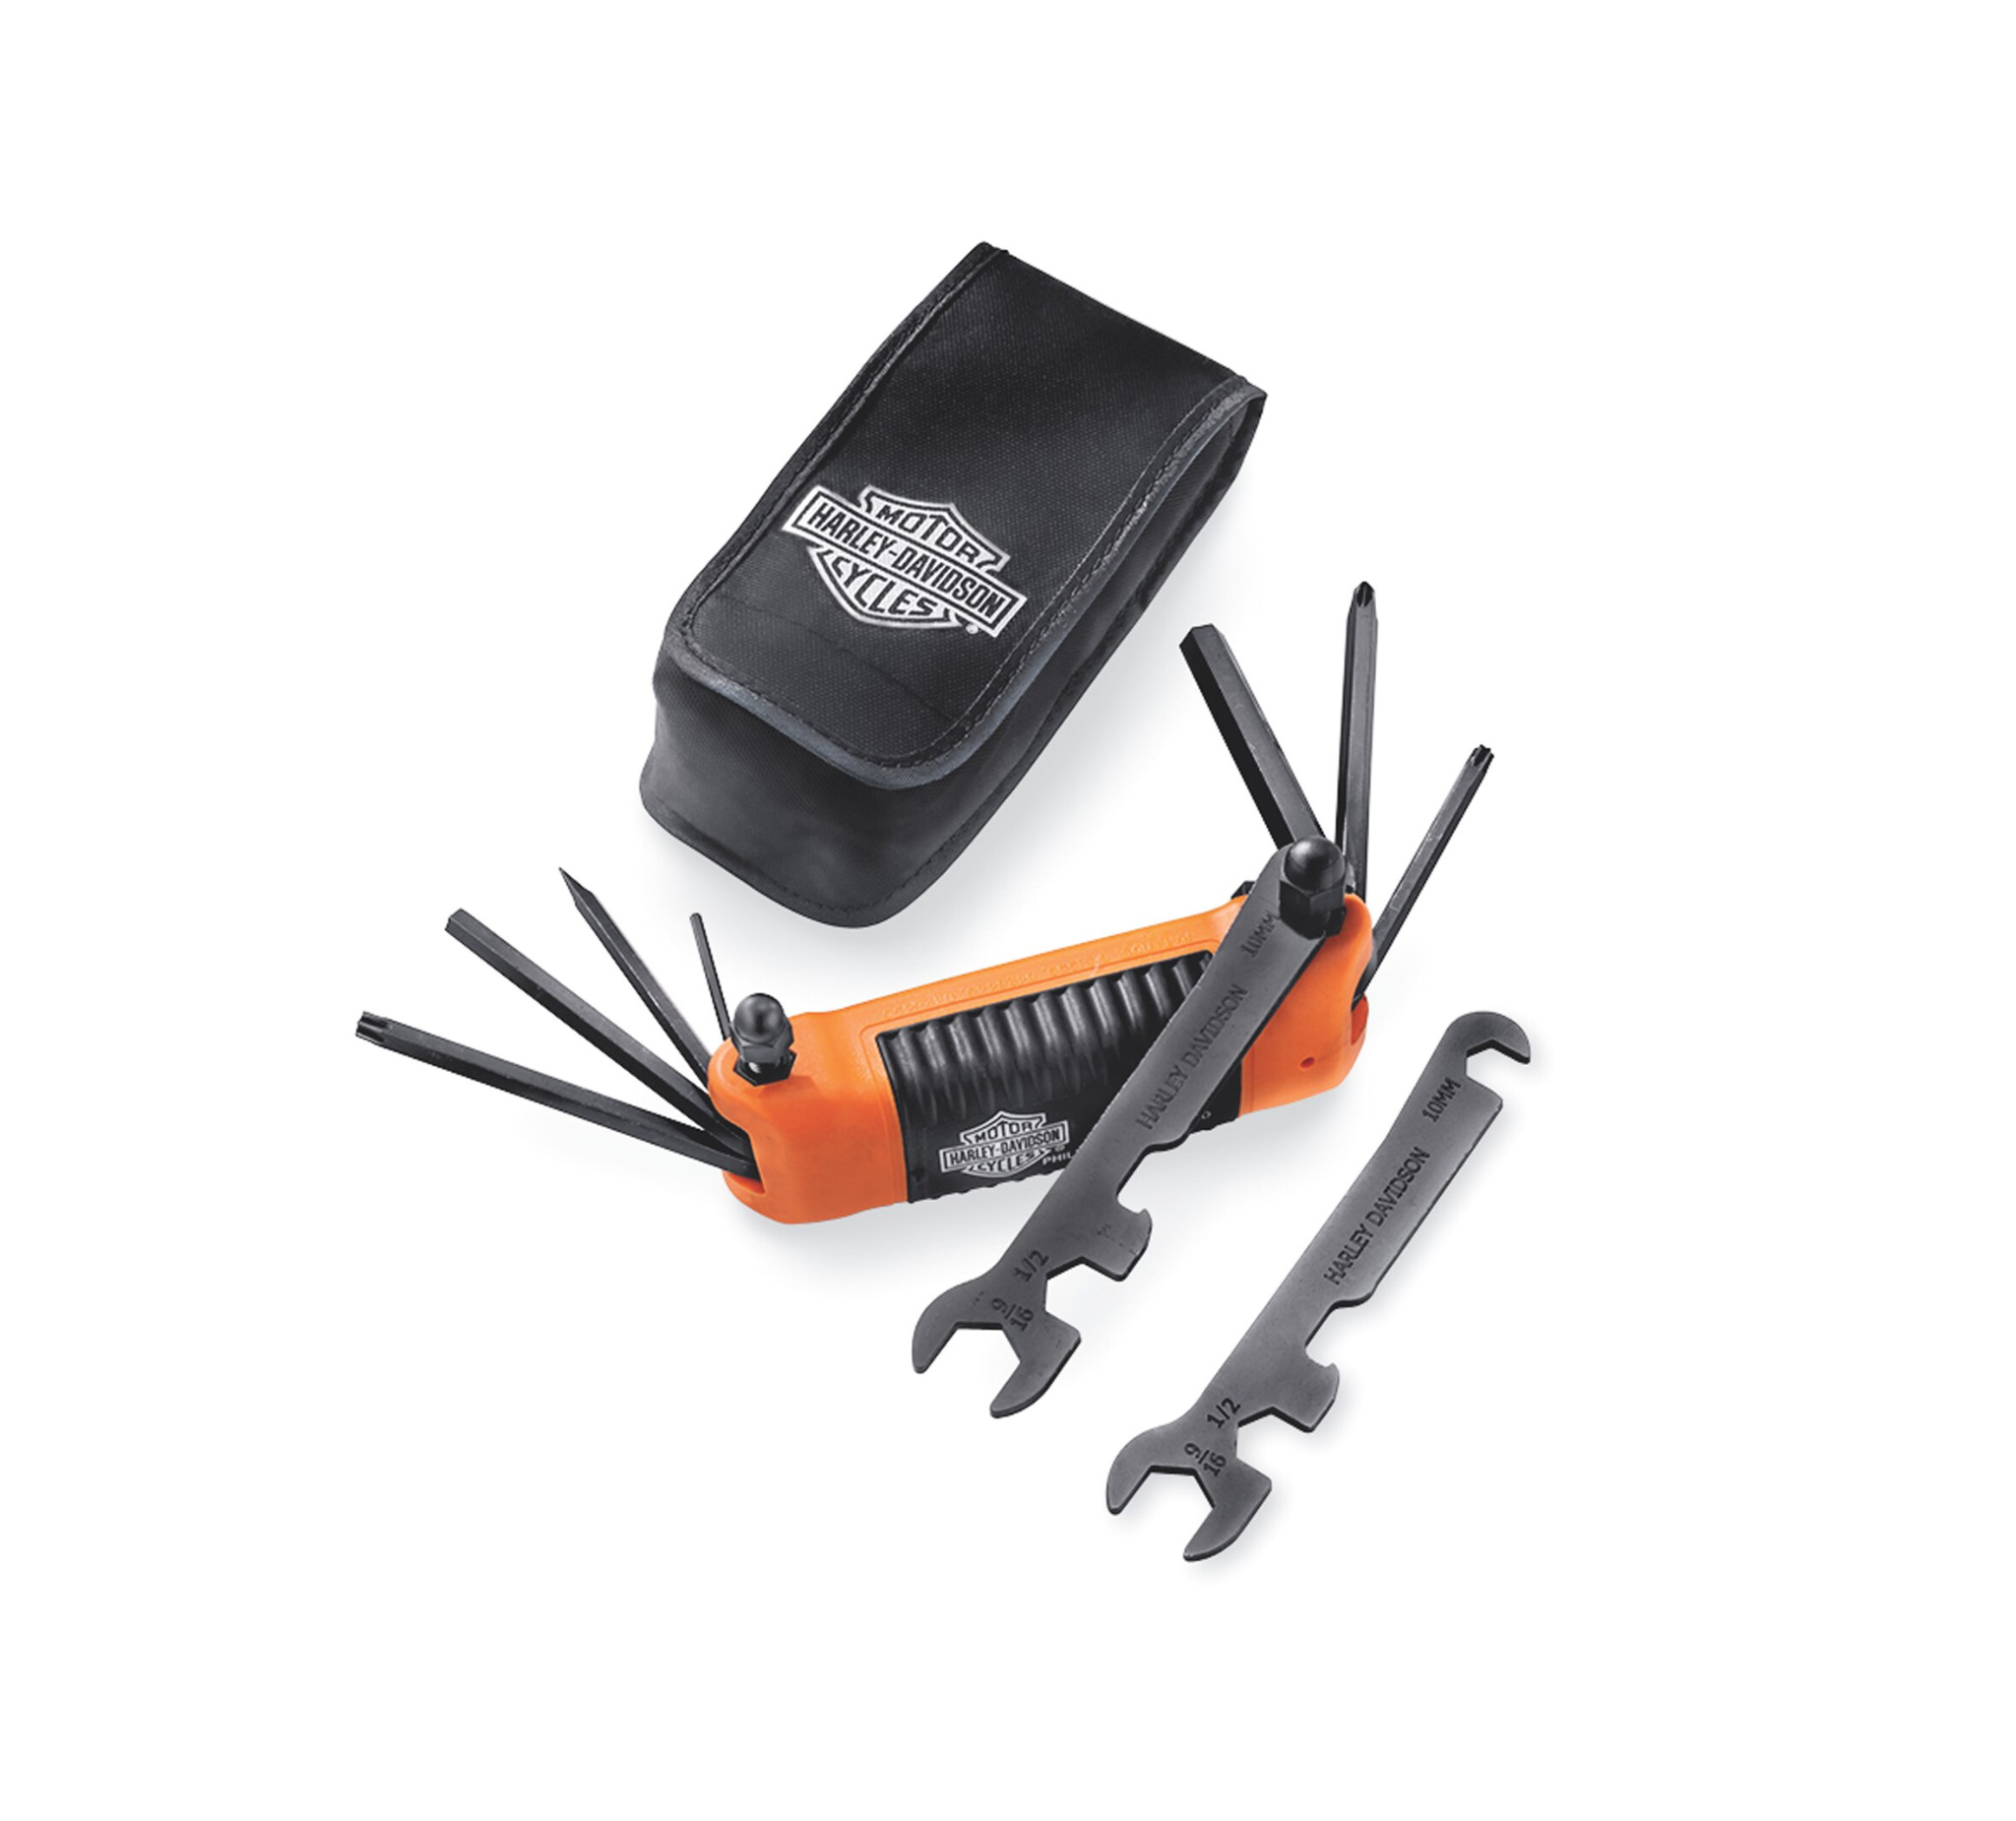 All-in-One Folding Tool